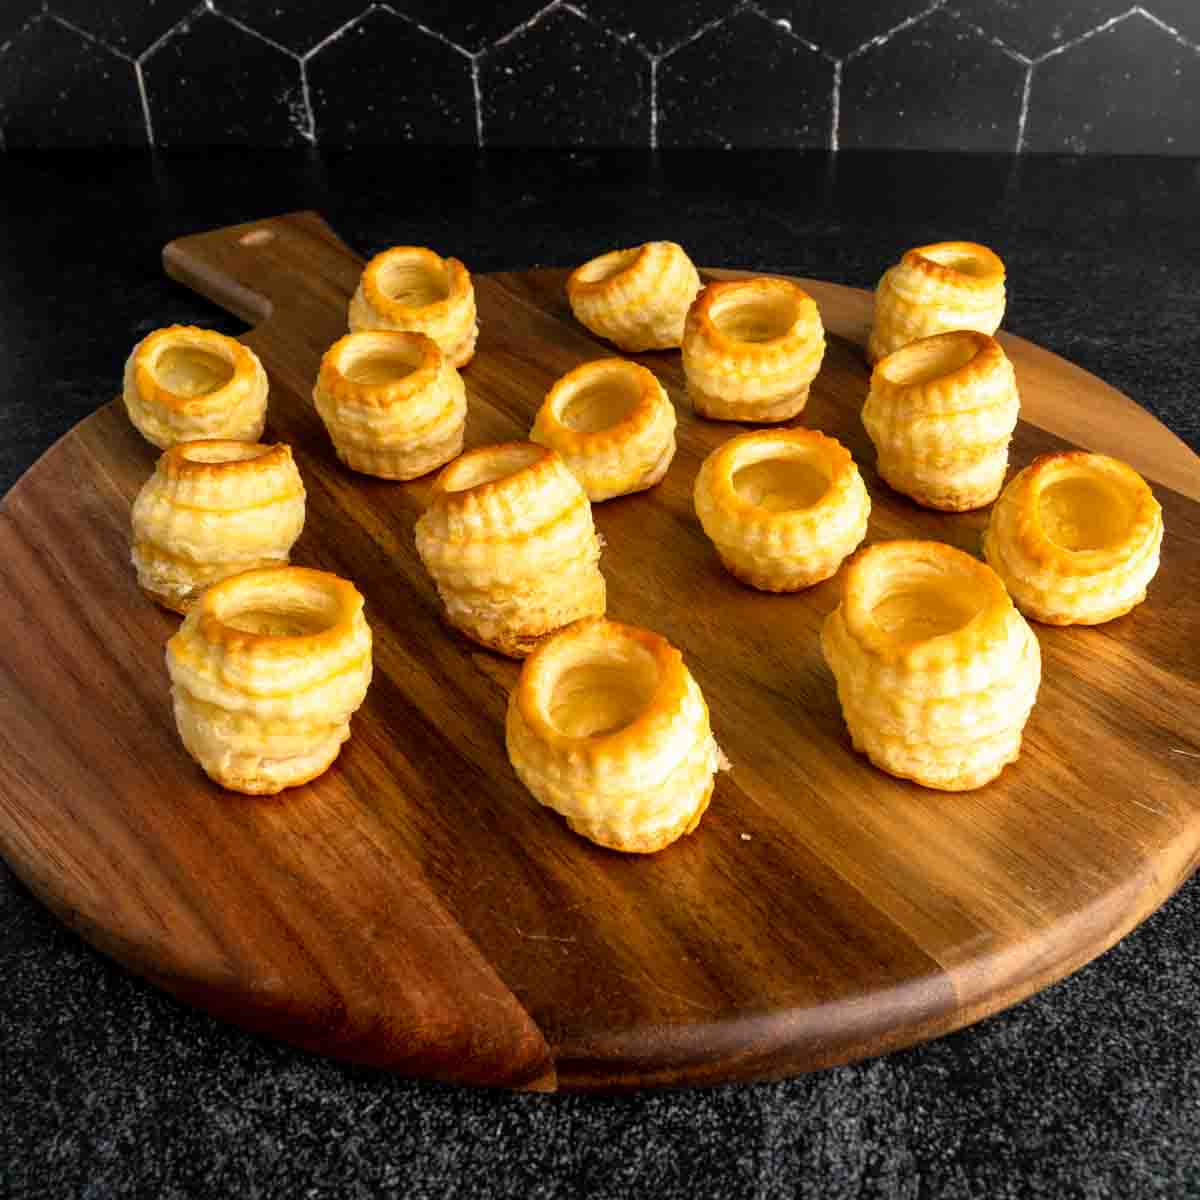 A platter of miniature vol au vent pastries on a wooden tray.